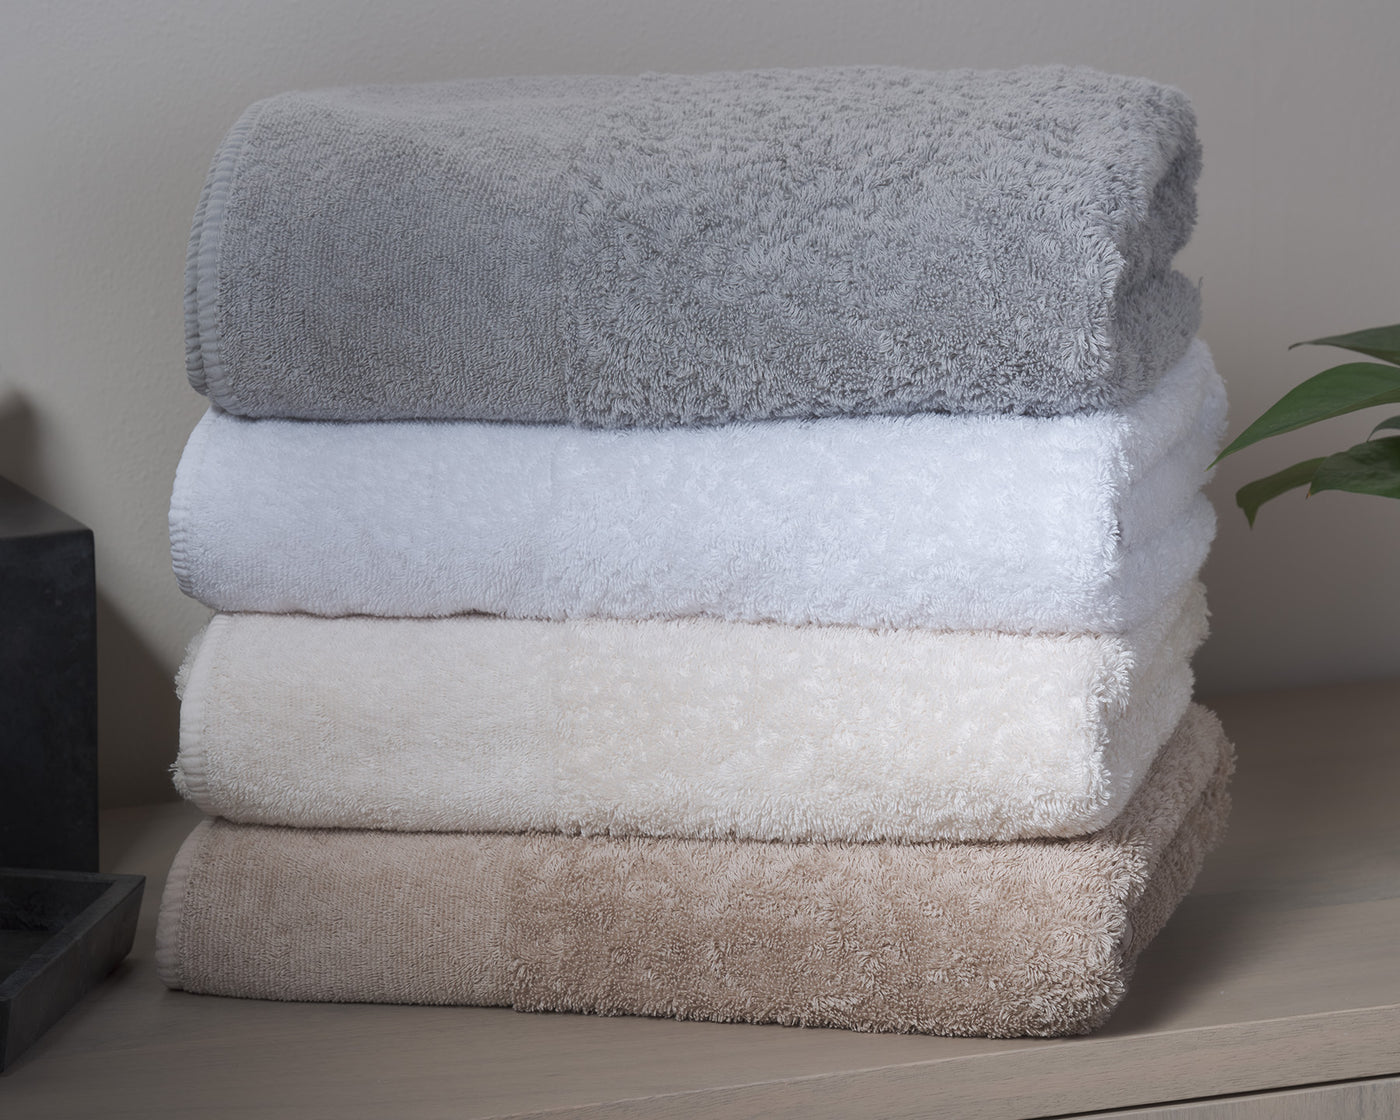 A Plushy collection of towels in 4 colors and 5 different sizes. Made in Portugal.